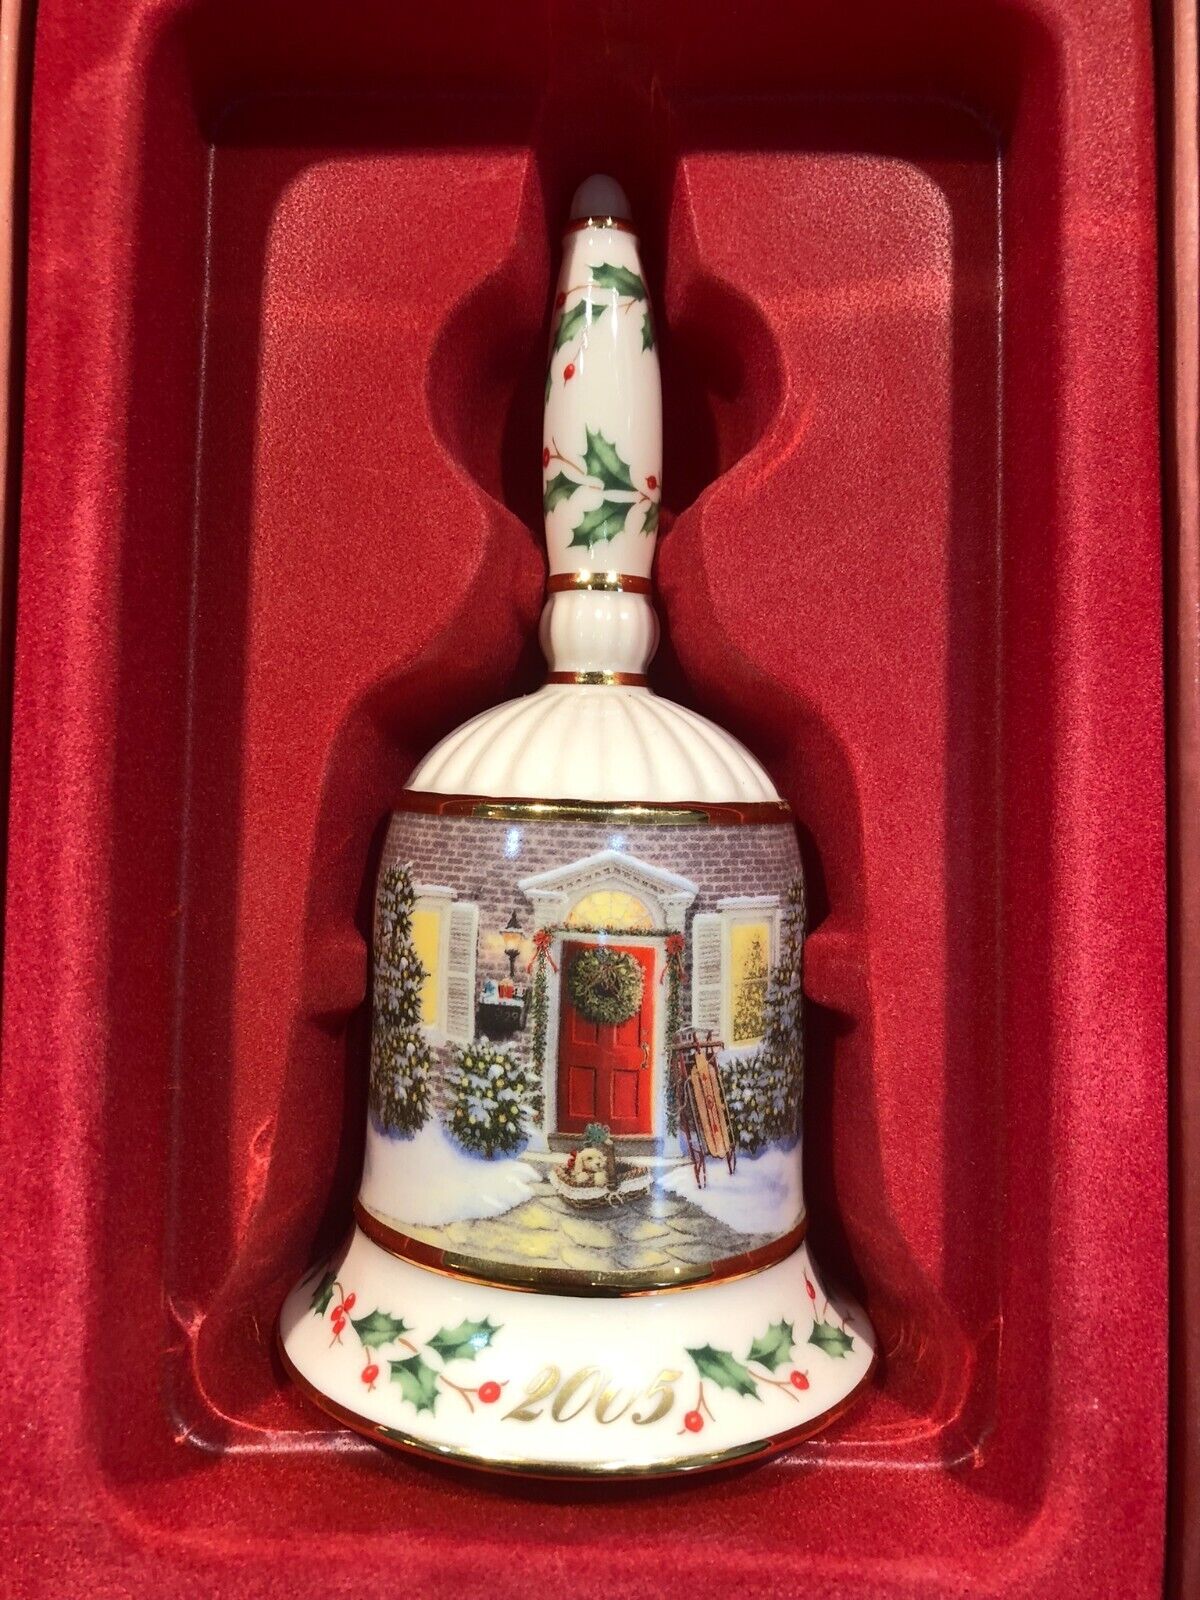 2005 Lenox Annual Holiday Bell Second in Series “Home for the Holidays” 7”